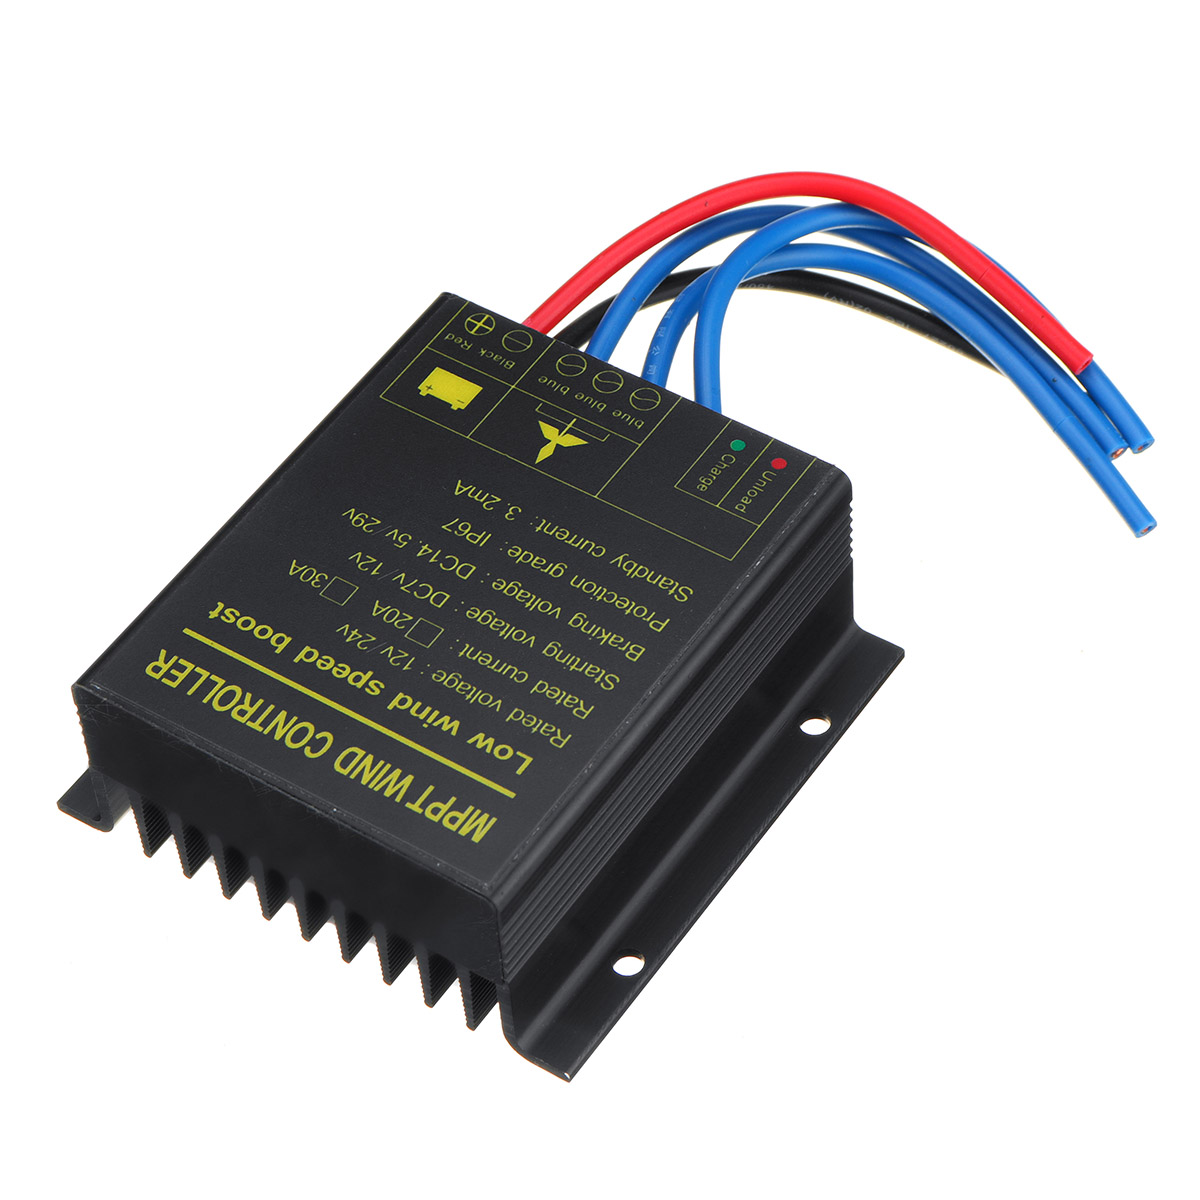 Find 12/24V MPPT Dual USB Wind Power Controller Auto Work Wind Generator Voltage Booster Controller Wind ControllerPWM for Sale on Gipsybee.com with cryptocurrencies